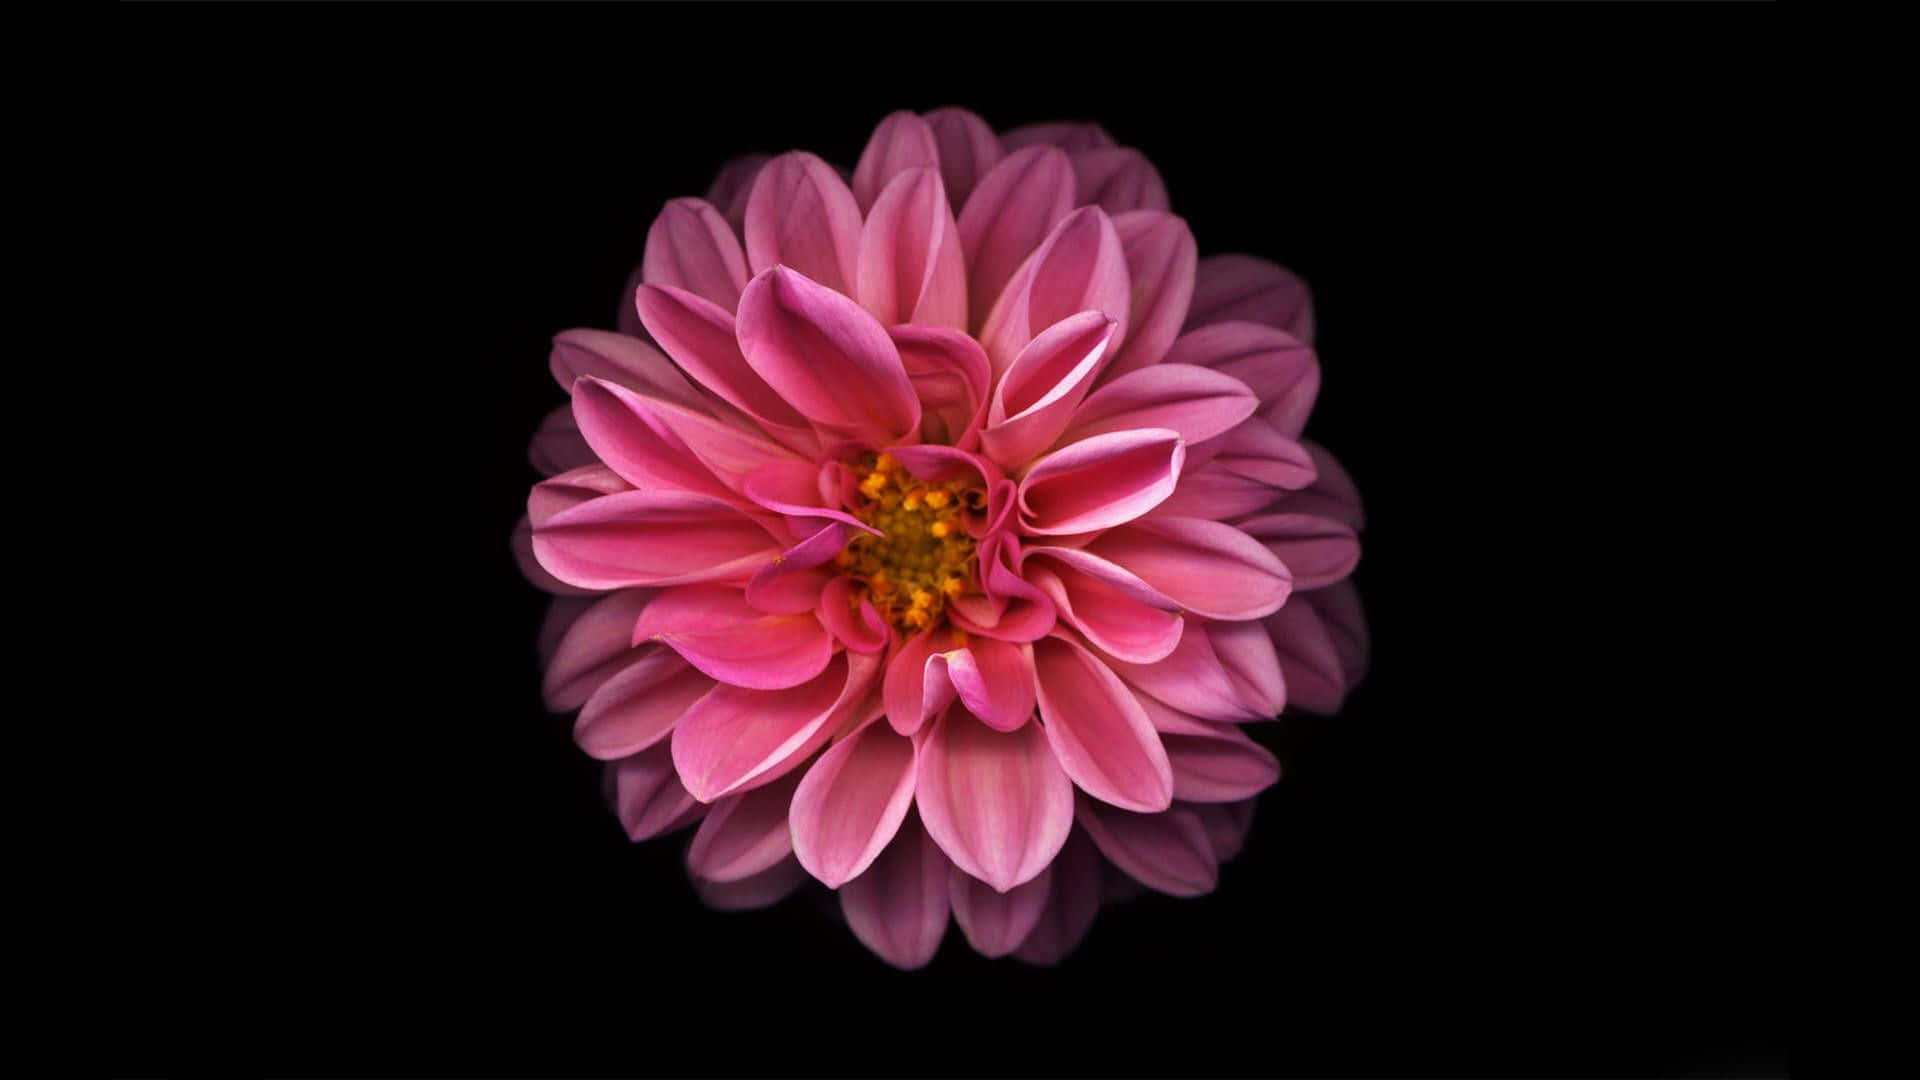 A Pink Flower Is Shown On A Black Background Wallpaper